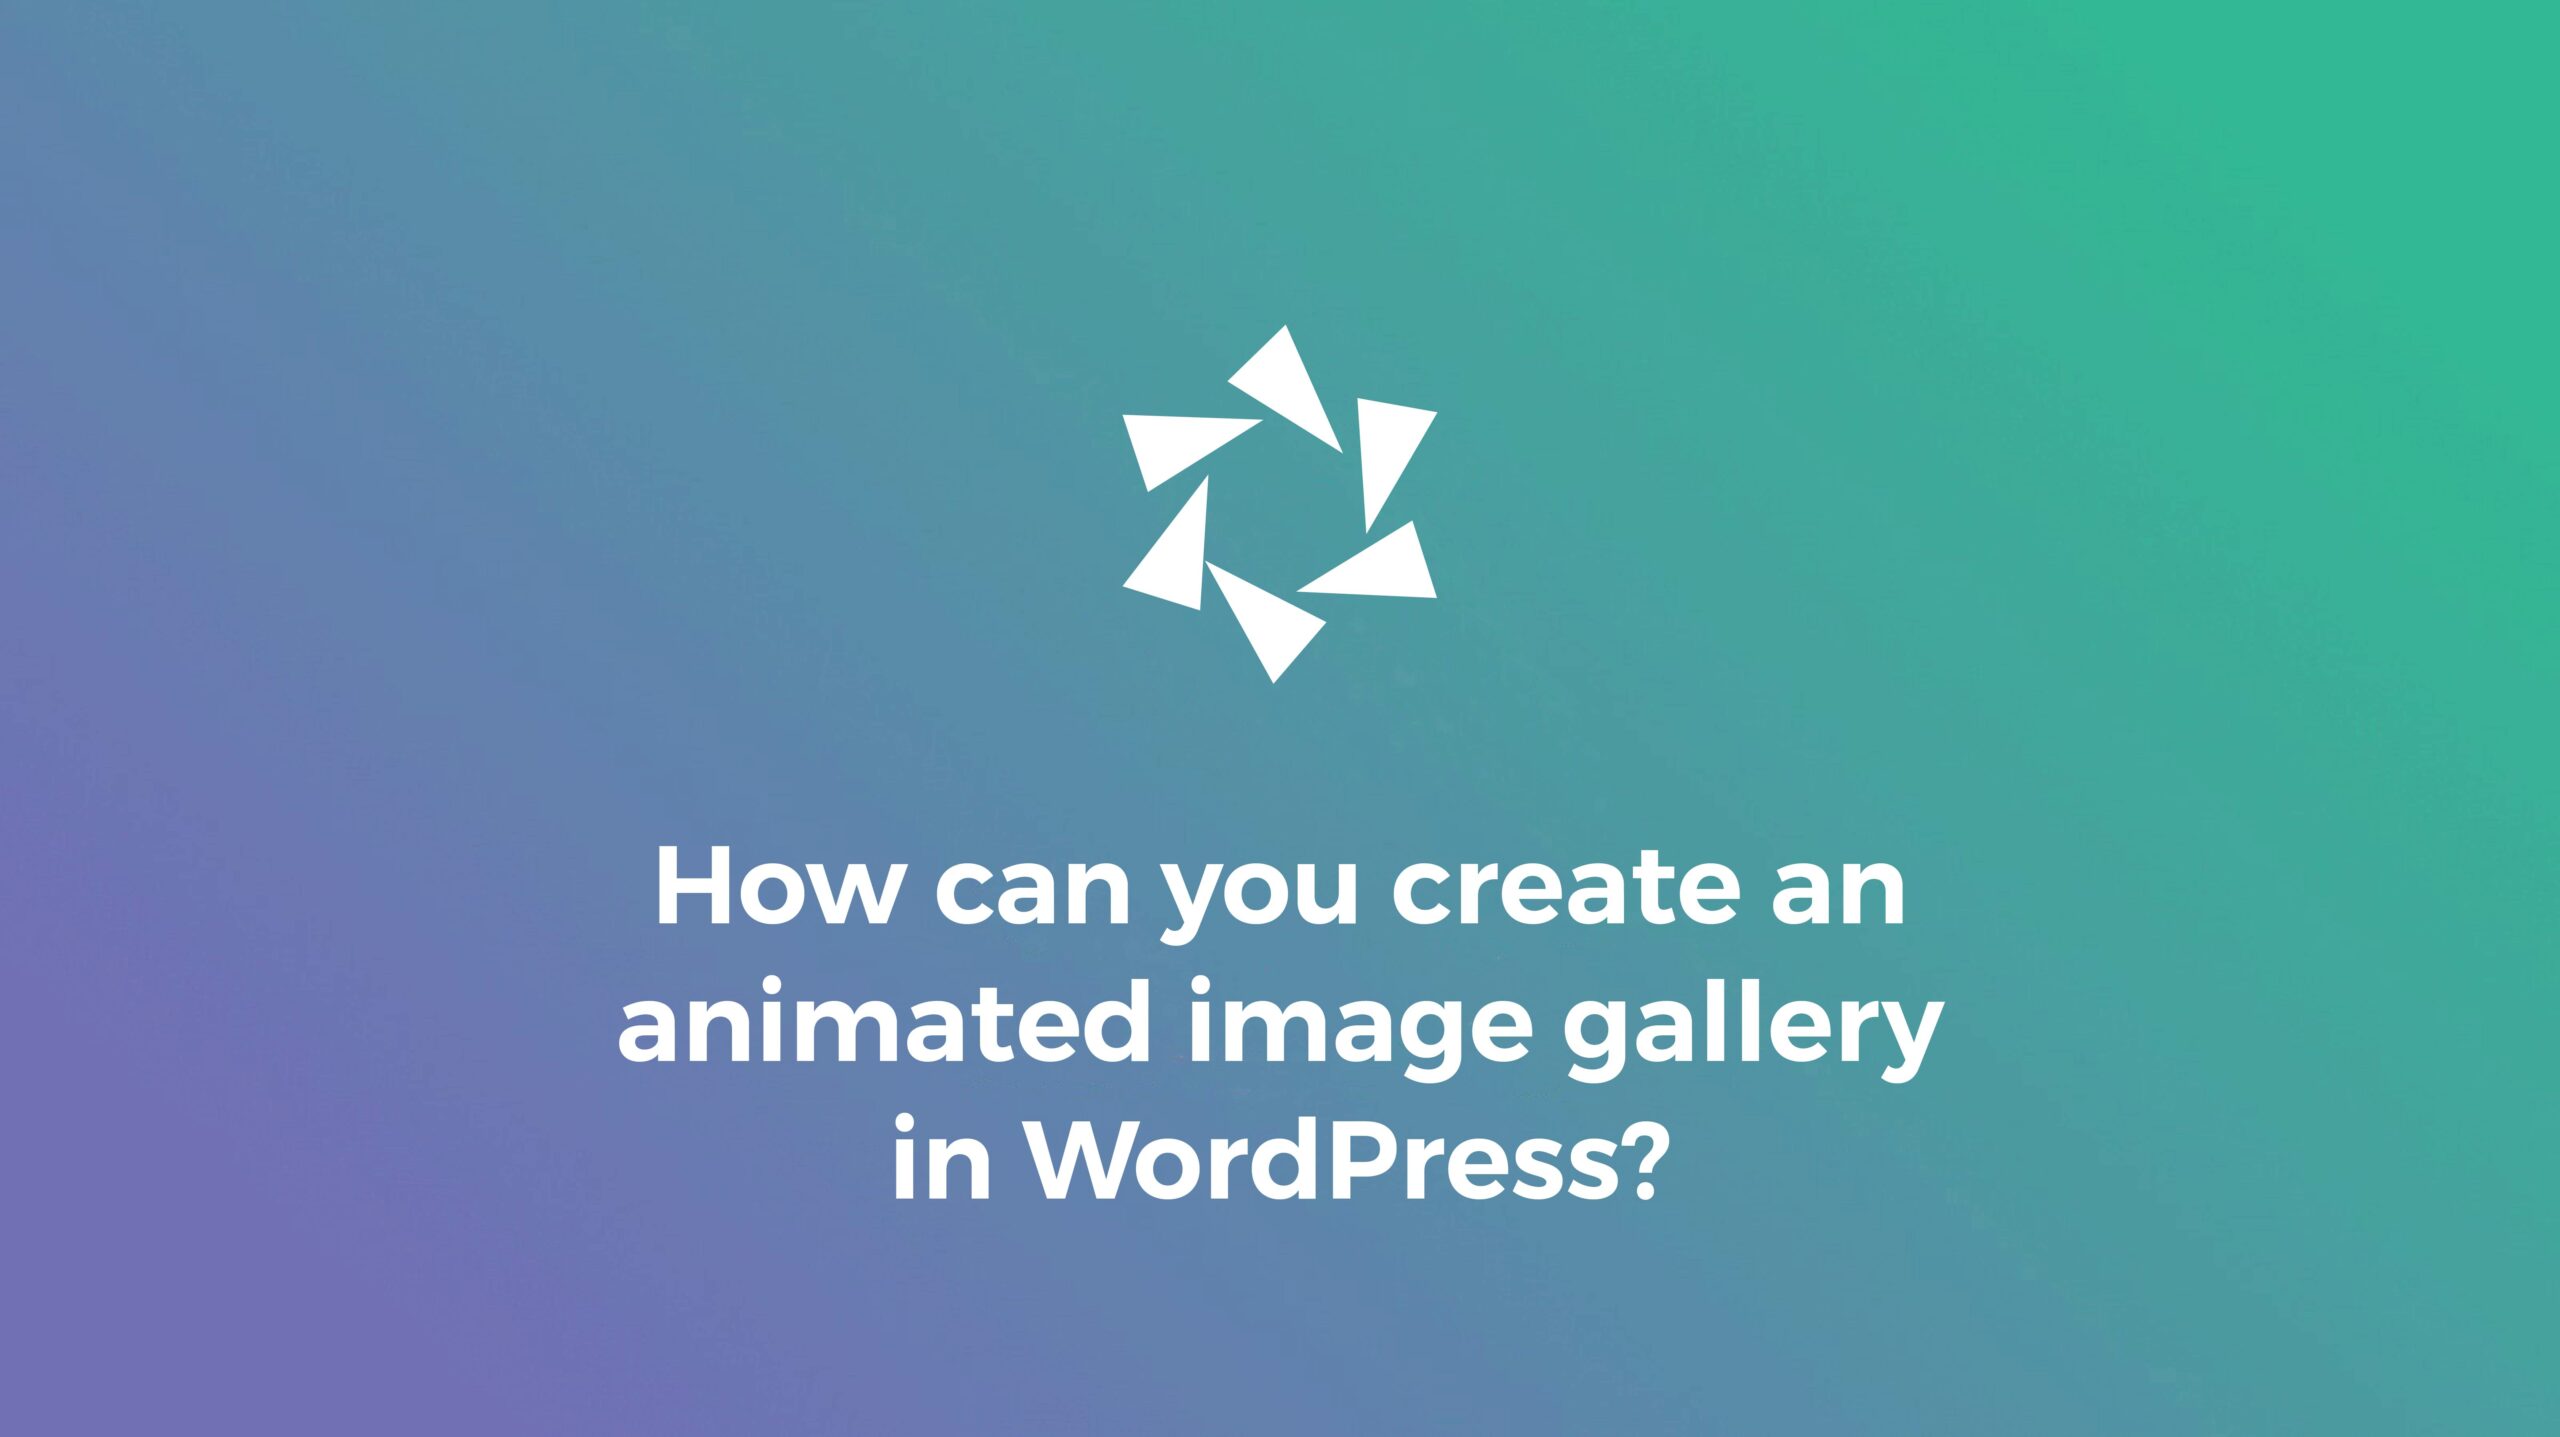 How do you create an animated image gallery in WordPress?